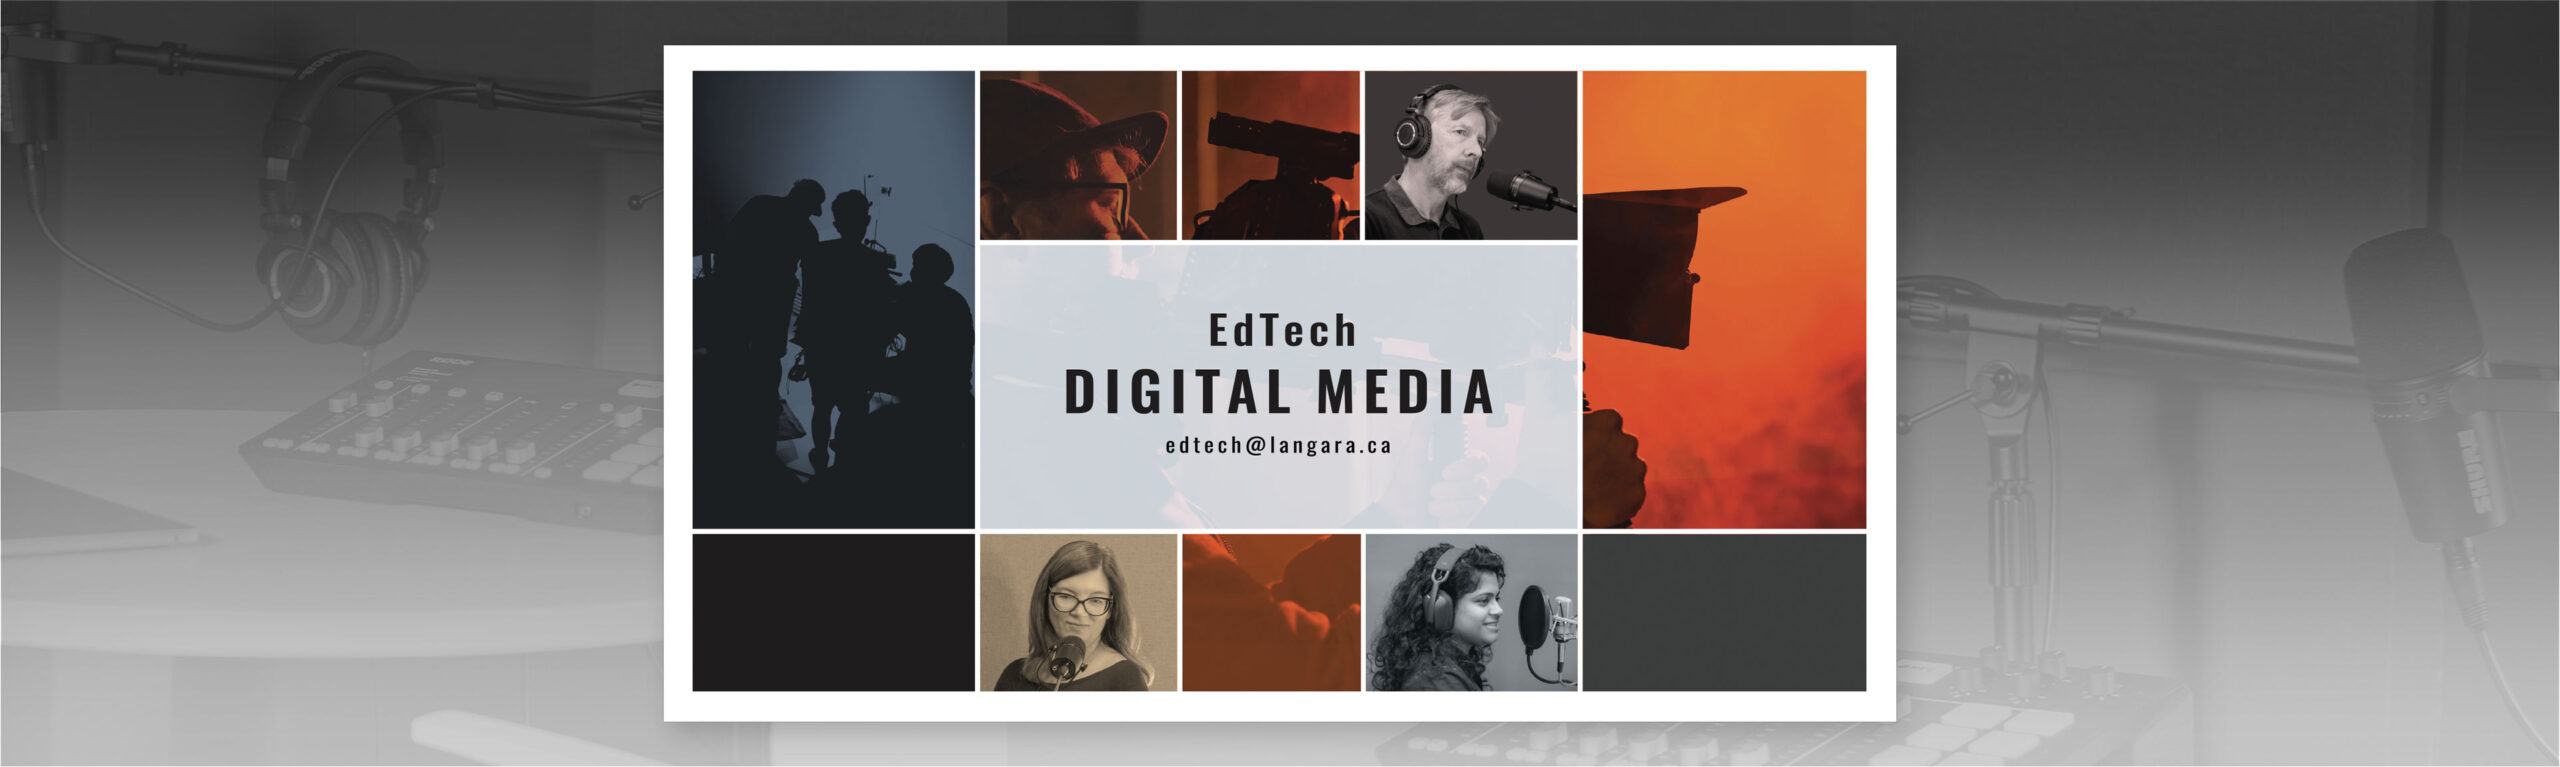 EdTech Digital Media Can Help You Create Engaging Content for Your Courses